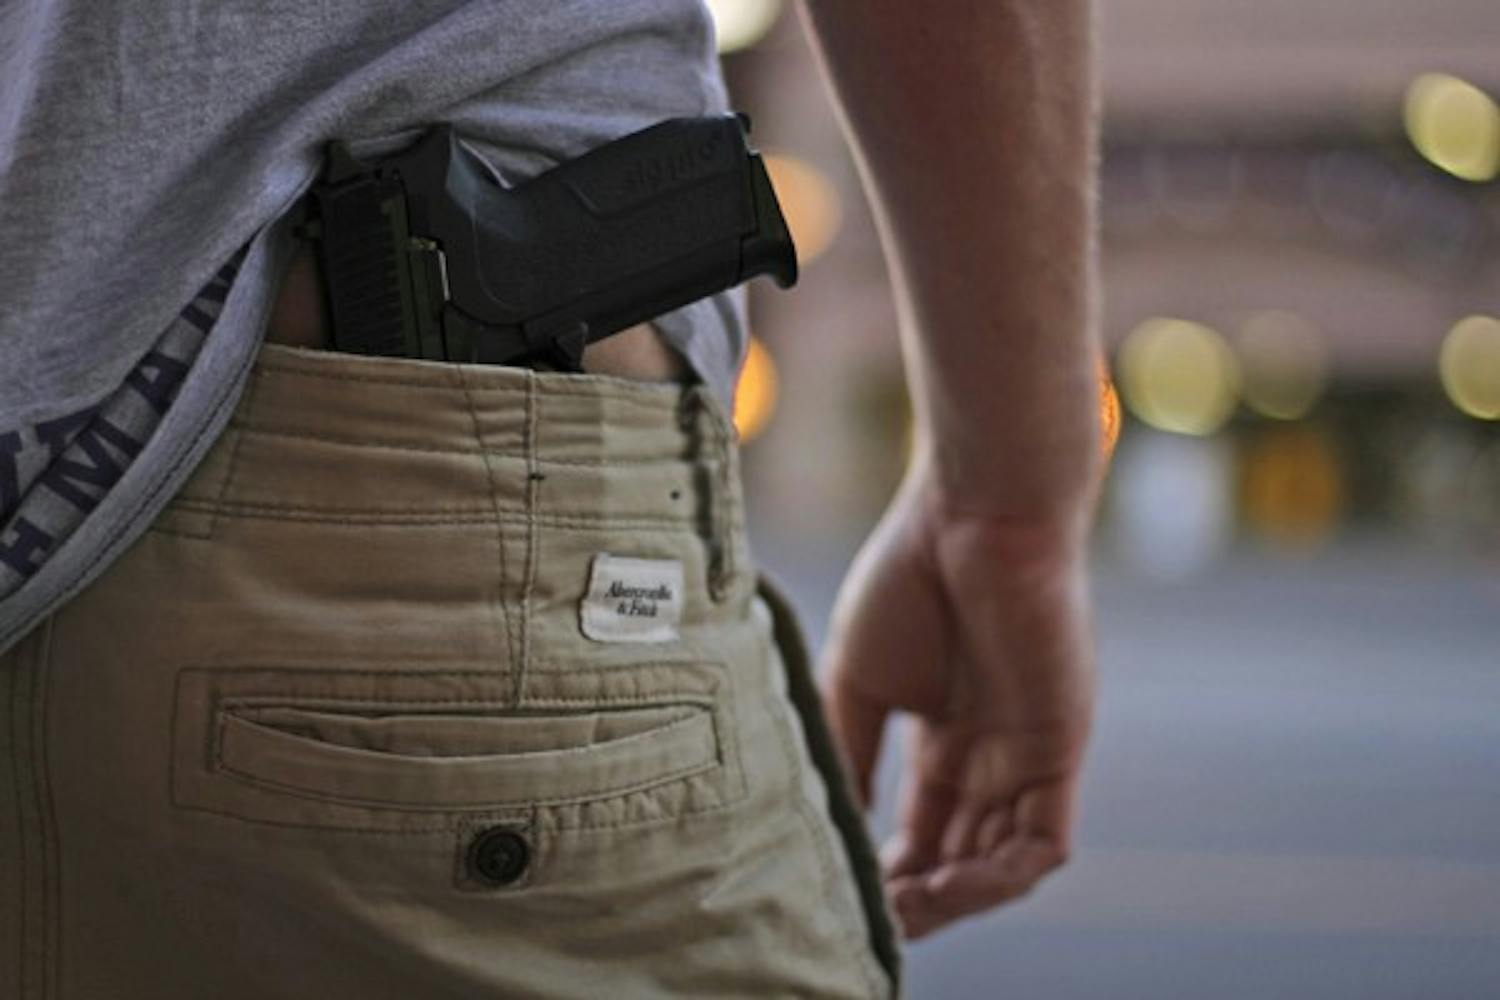 A handgun is concealed in this photo illustration.&nbsp;